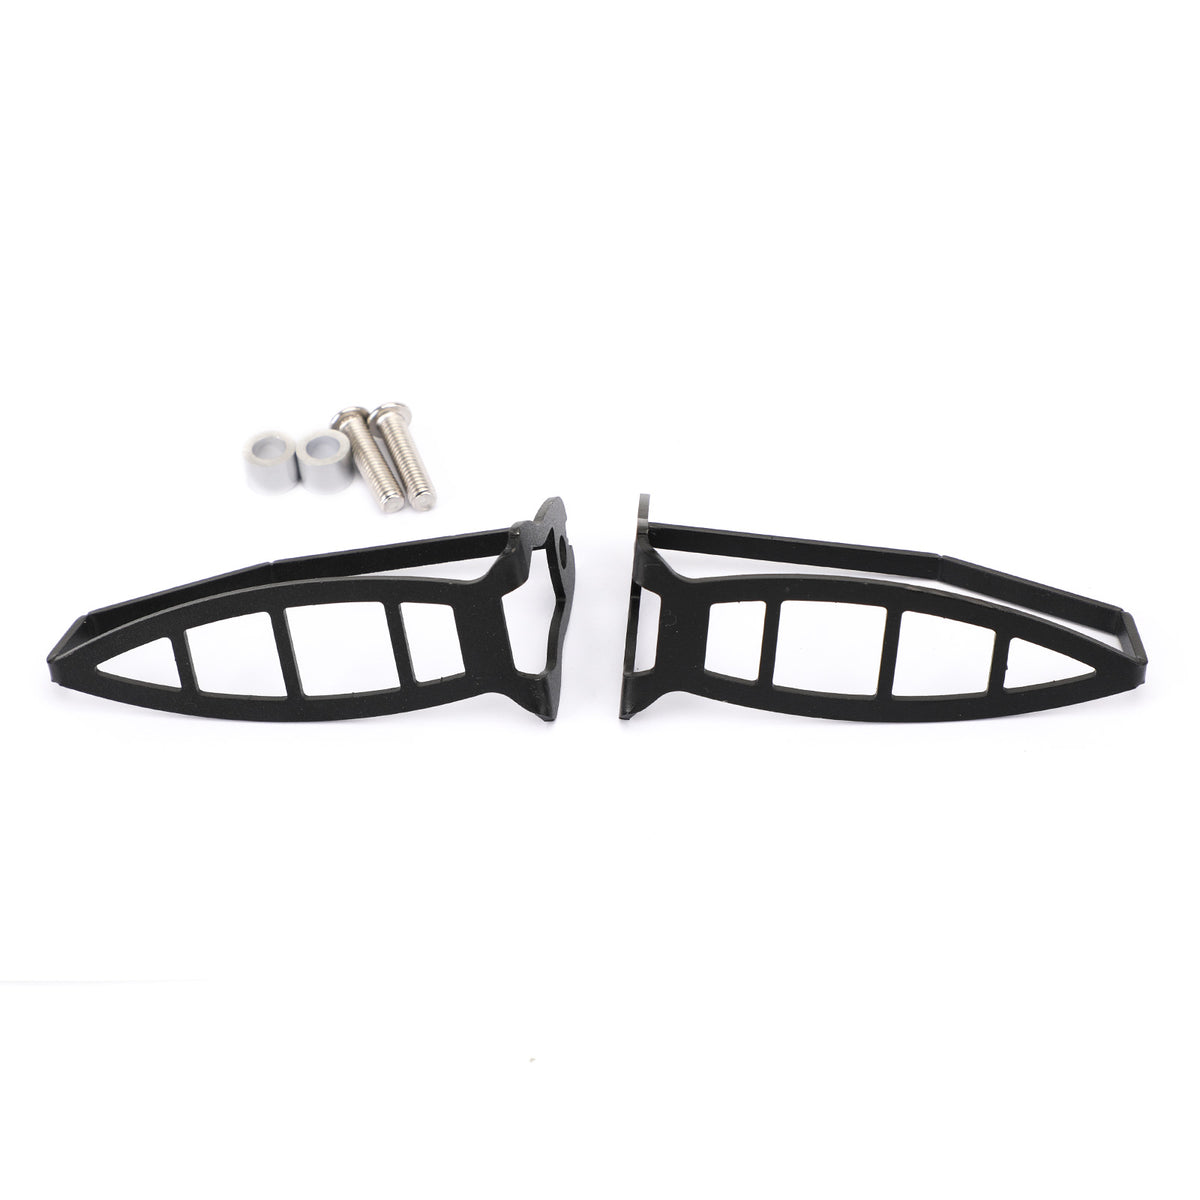 Motorcycle Front Turn Signal Guard Cover fit for BMW F700GS F800GS F750GS 04-19